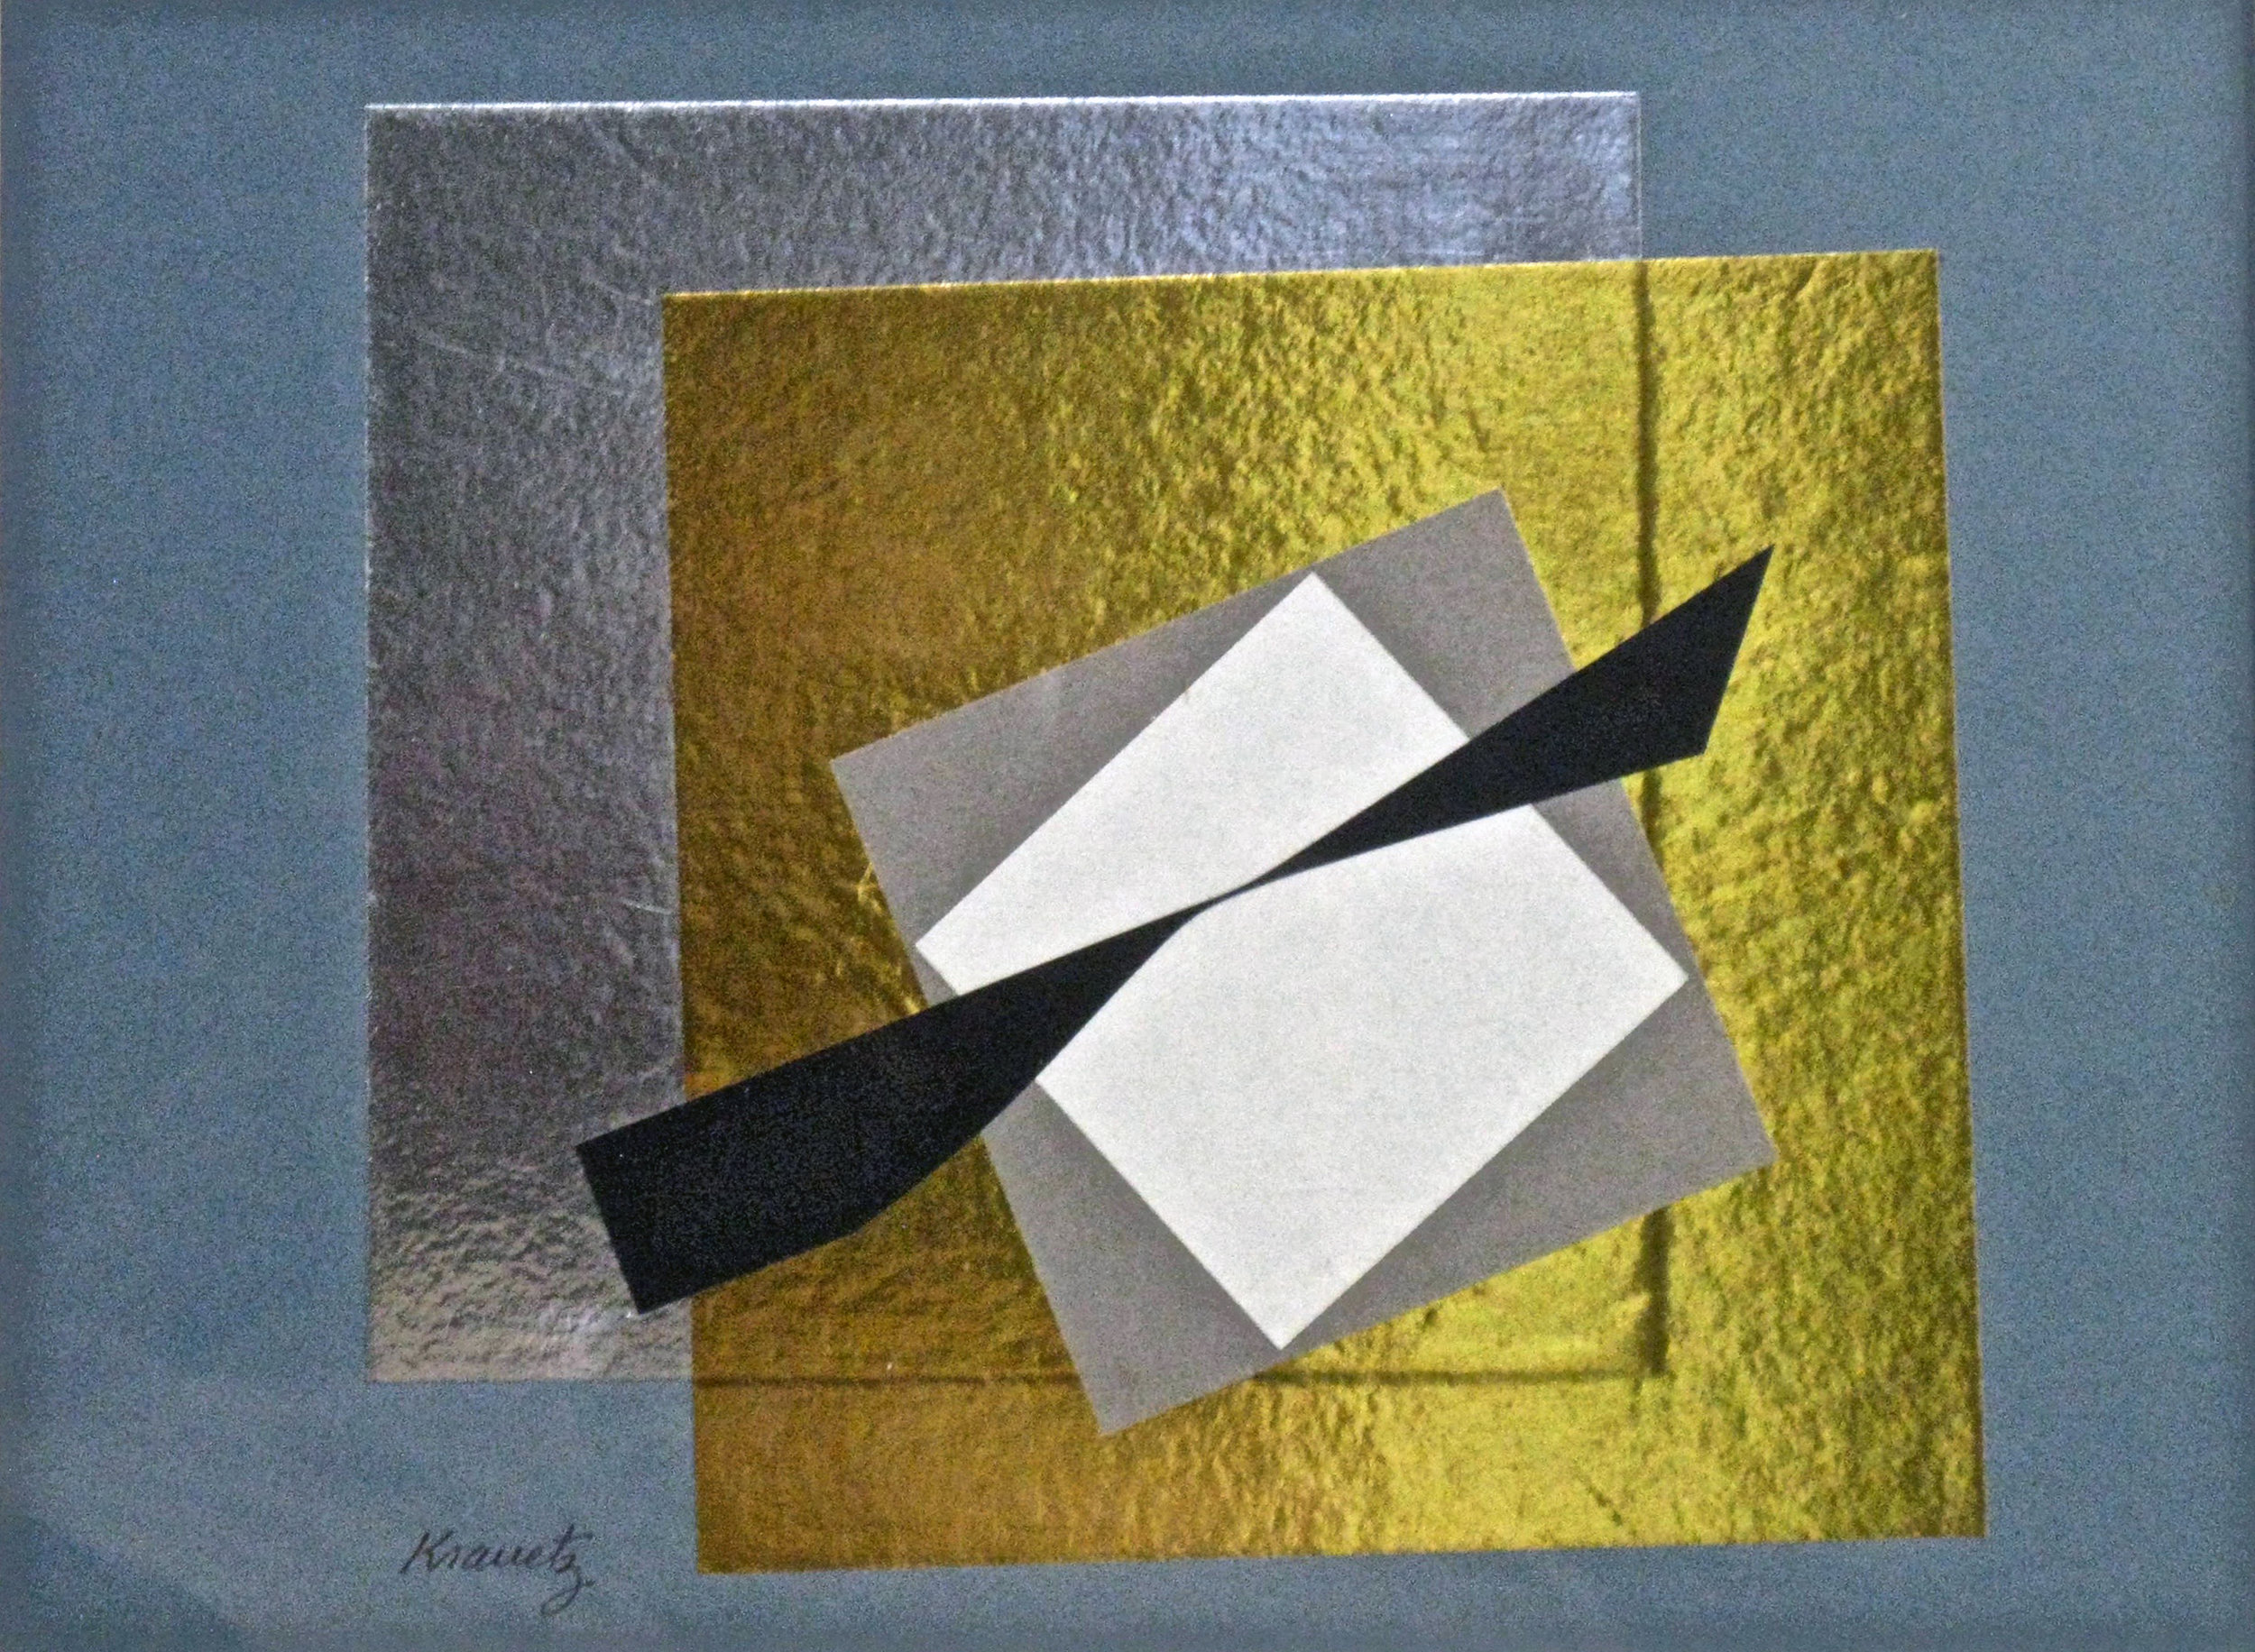 Black Tie Affair, 1990, Collage with Foil, 16x20 inches with mat